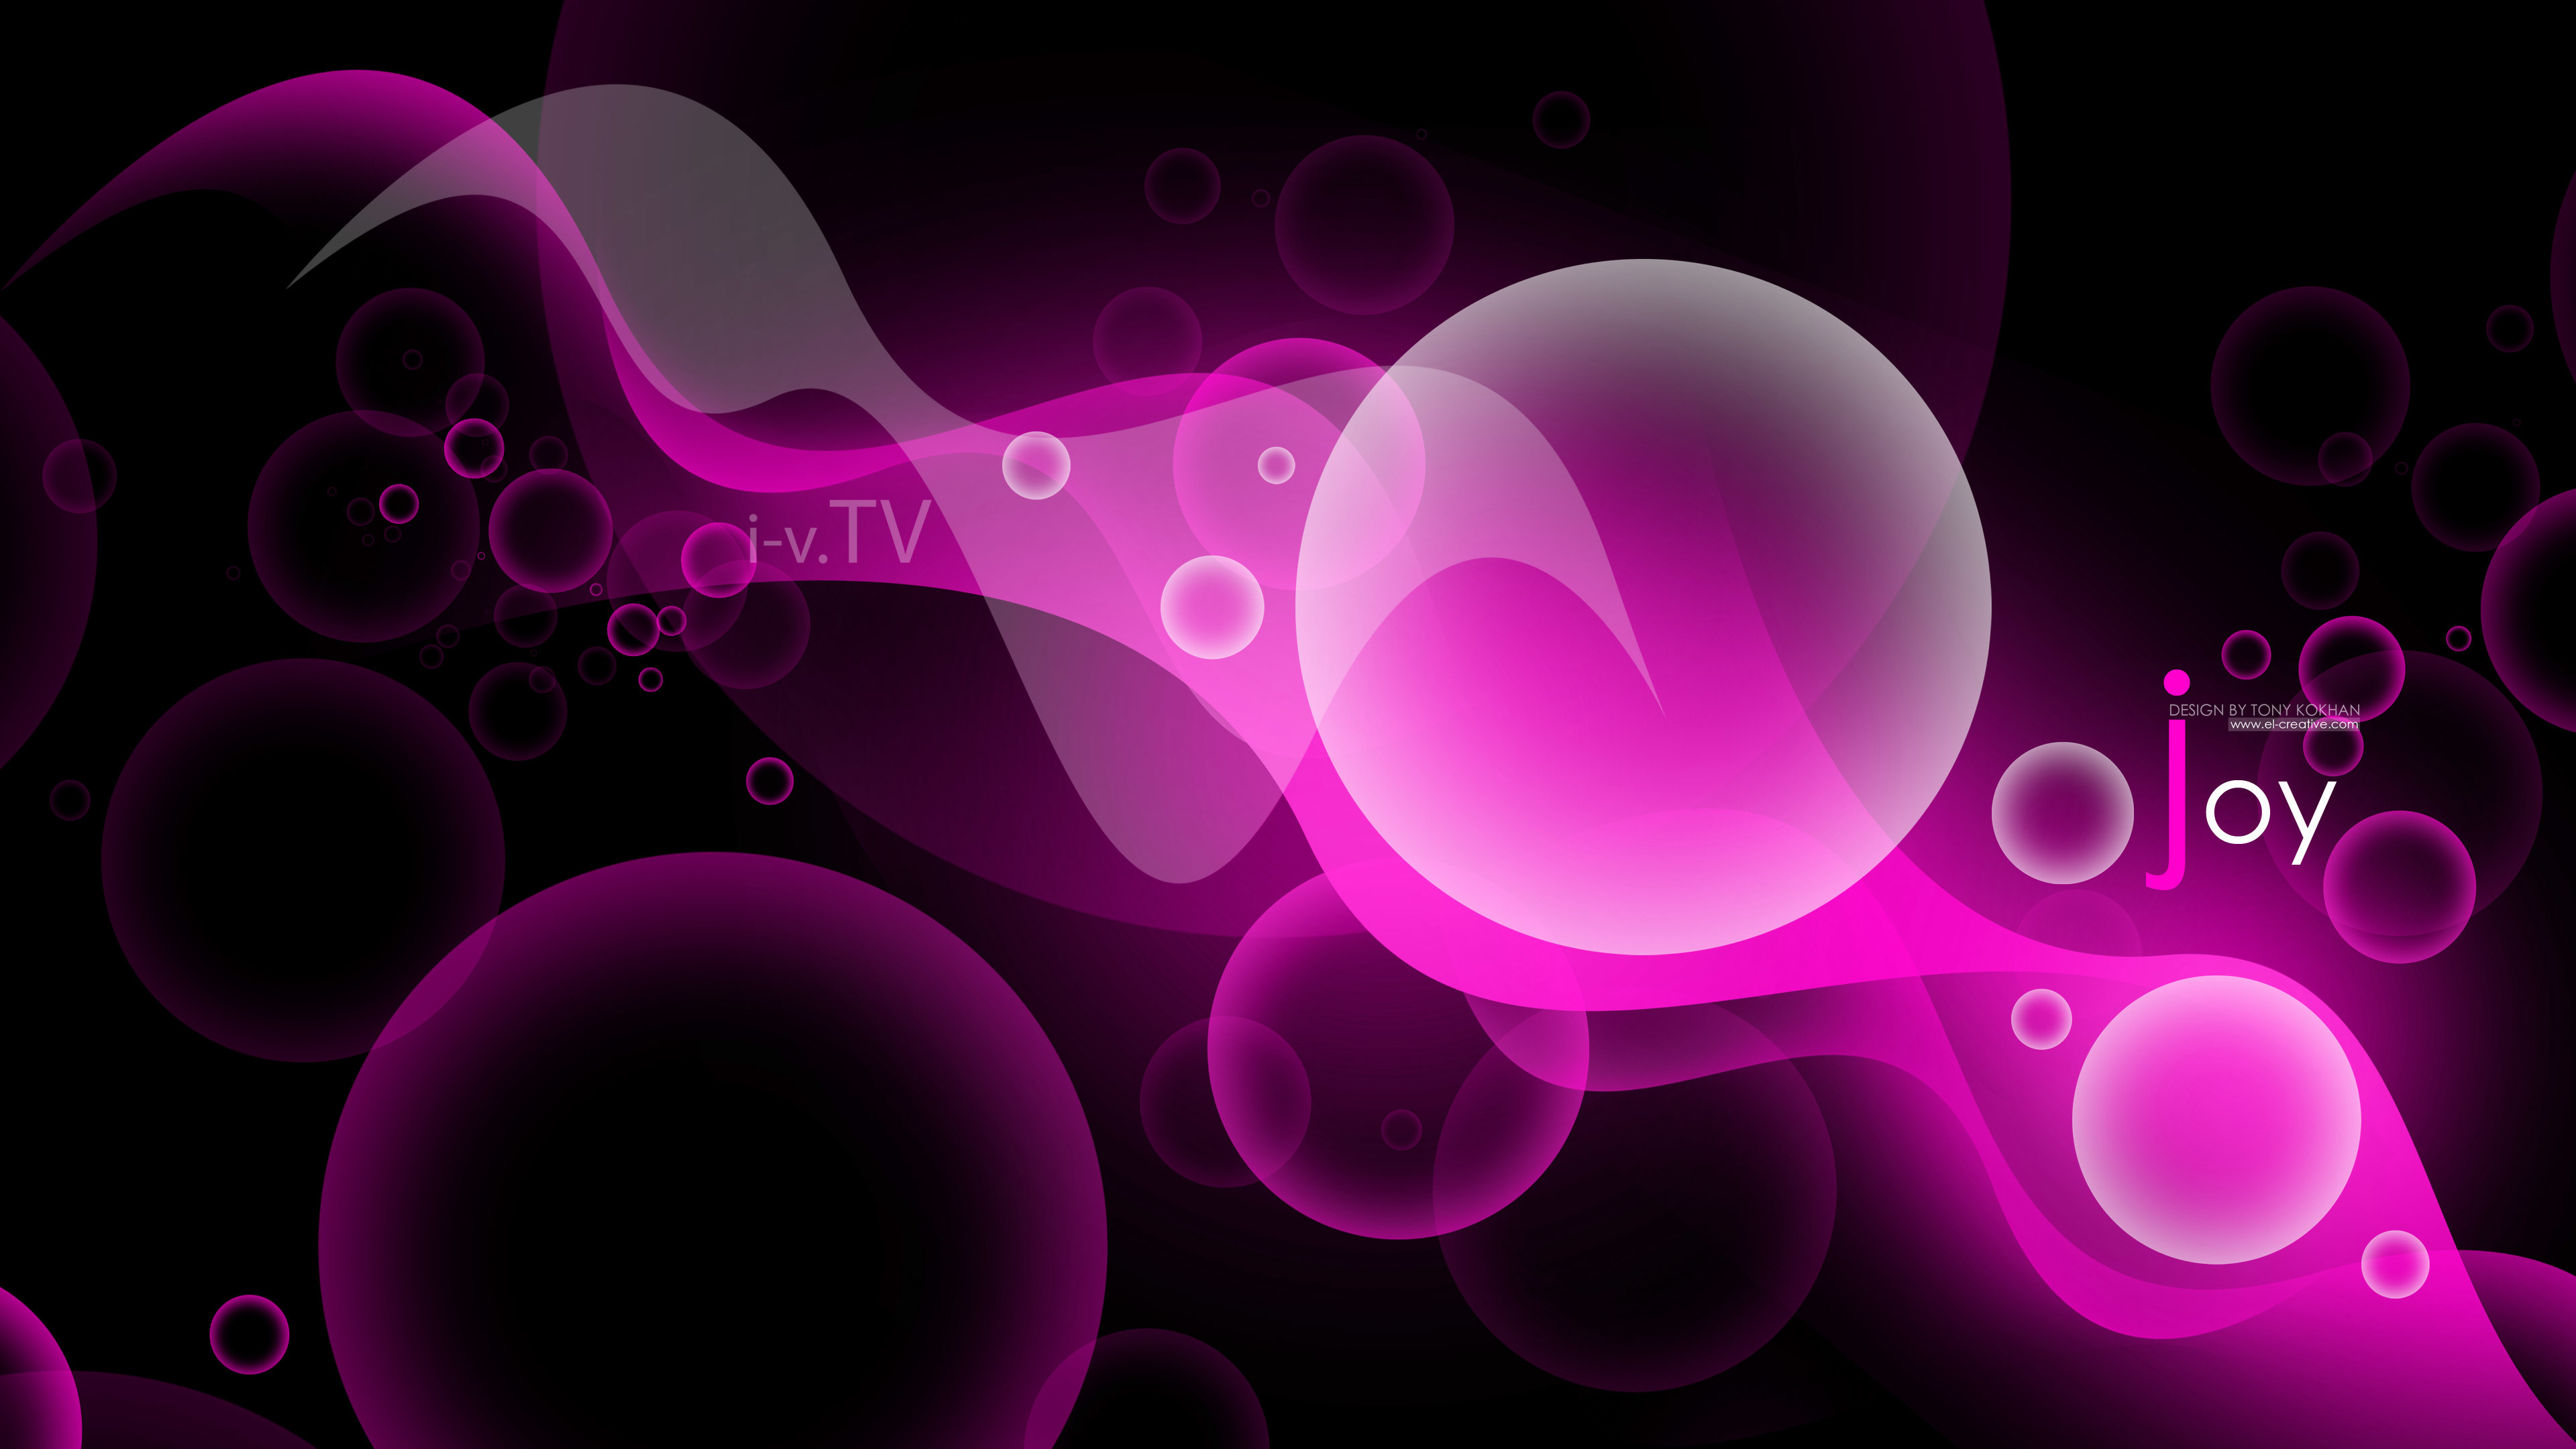 3840x2160 ... Joy-Simple-Creative-Abstract-Bubble-Style-2015-Pink- ...